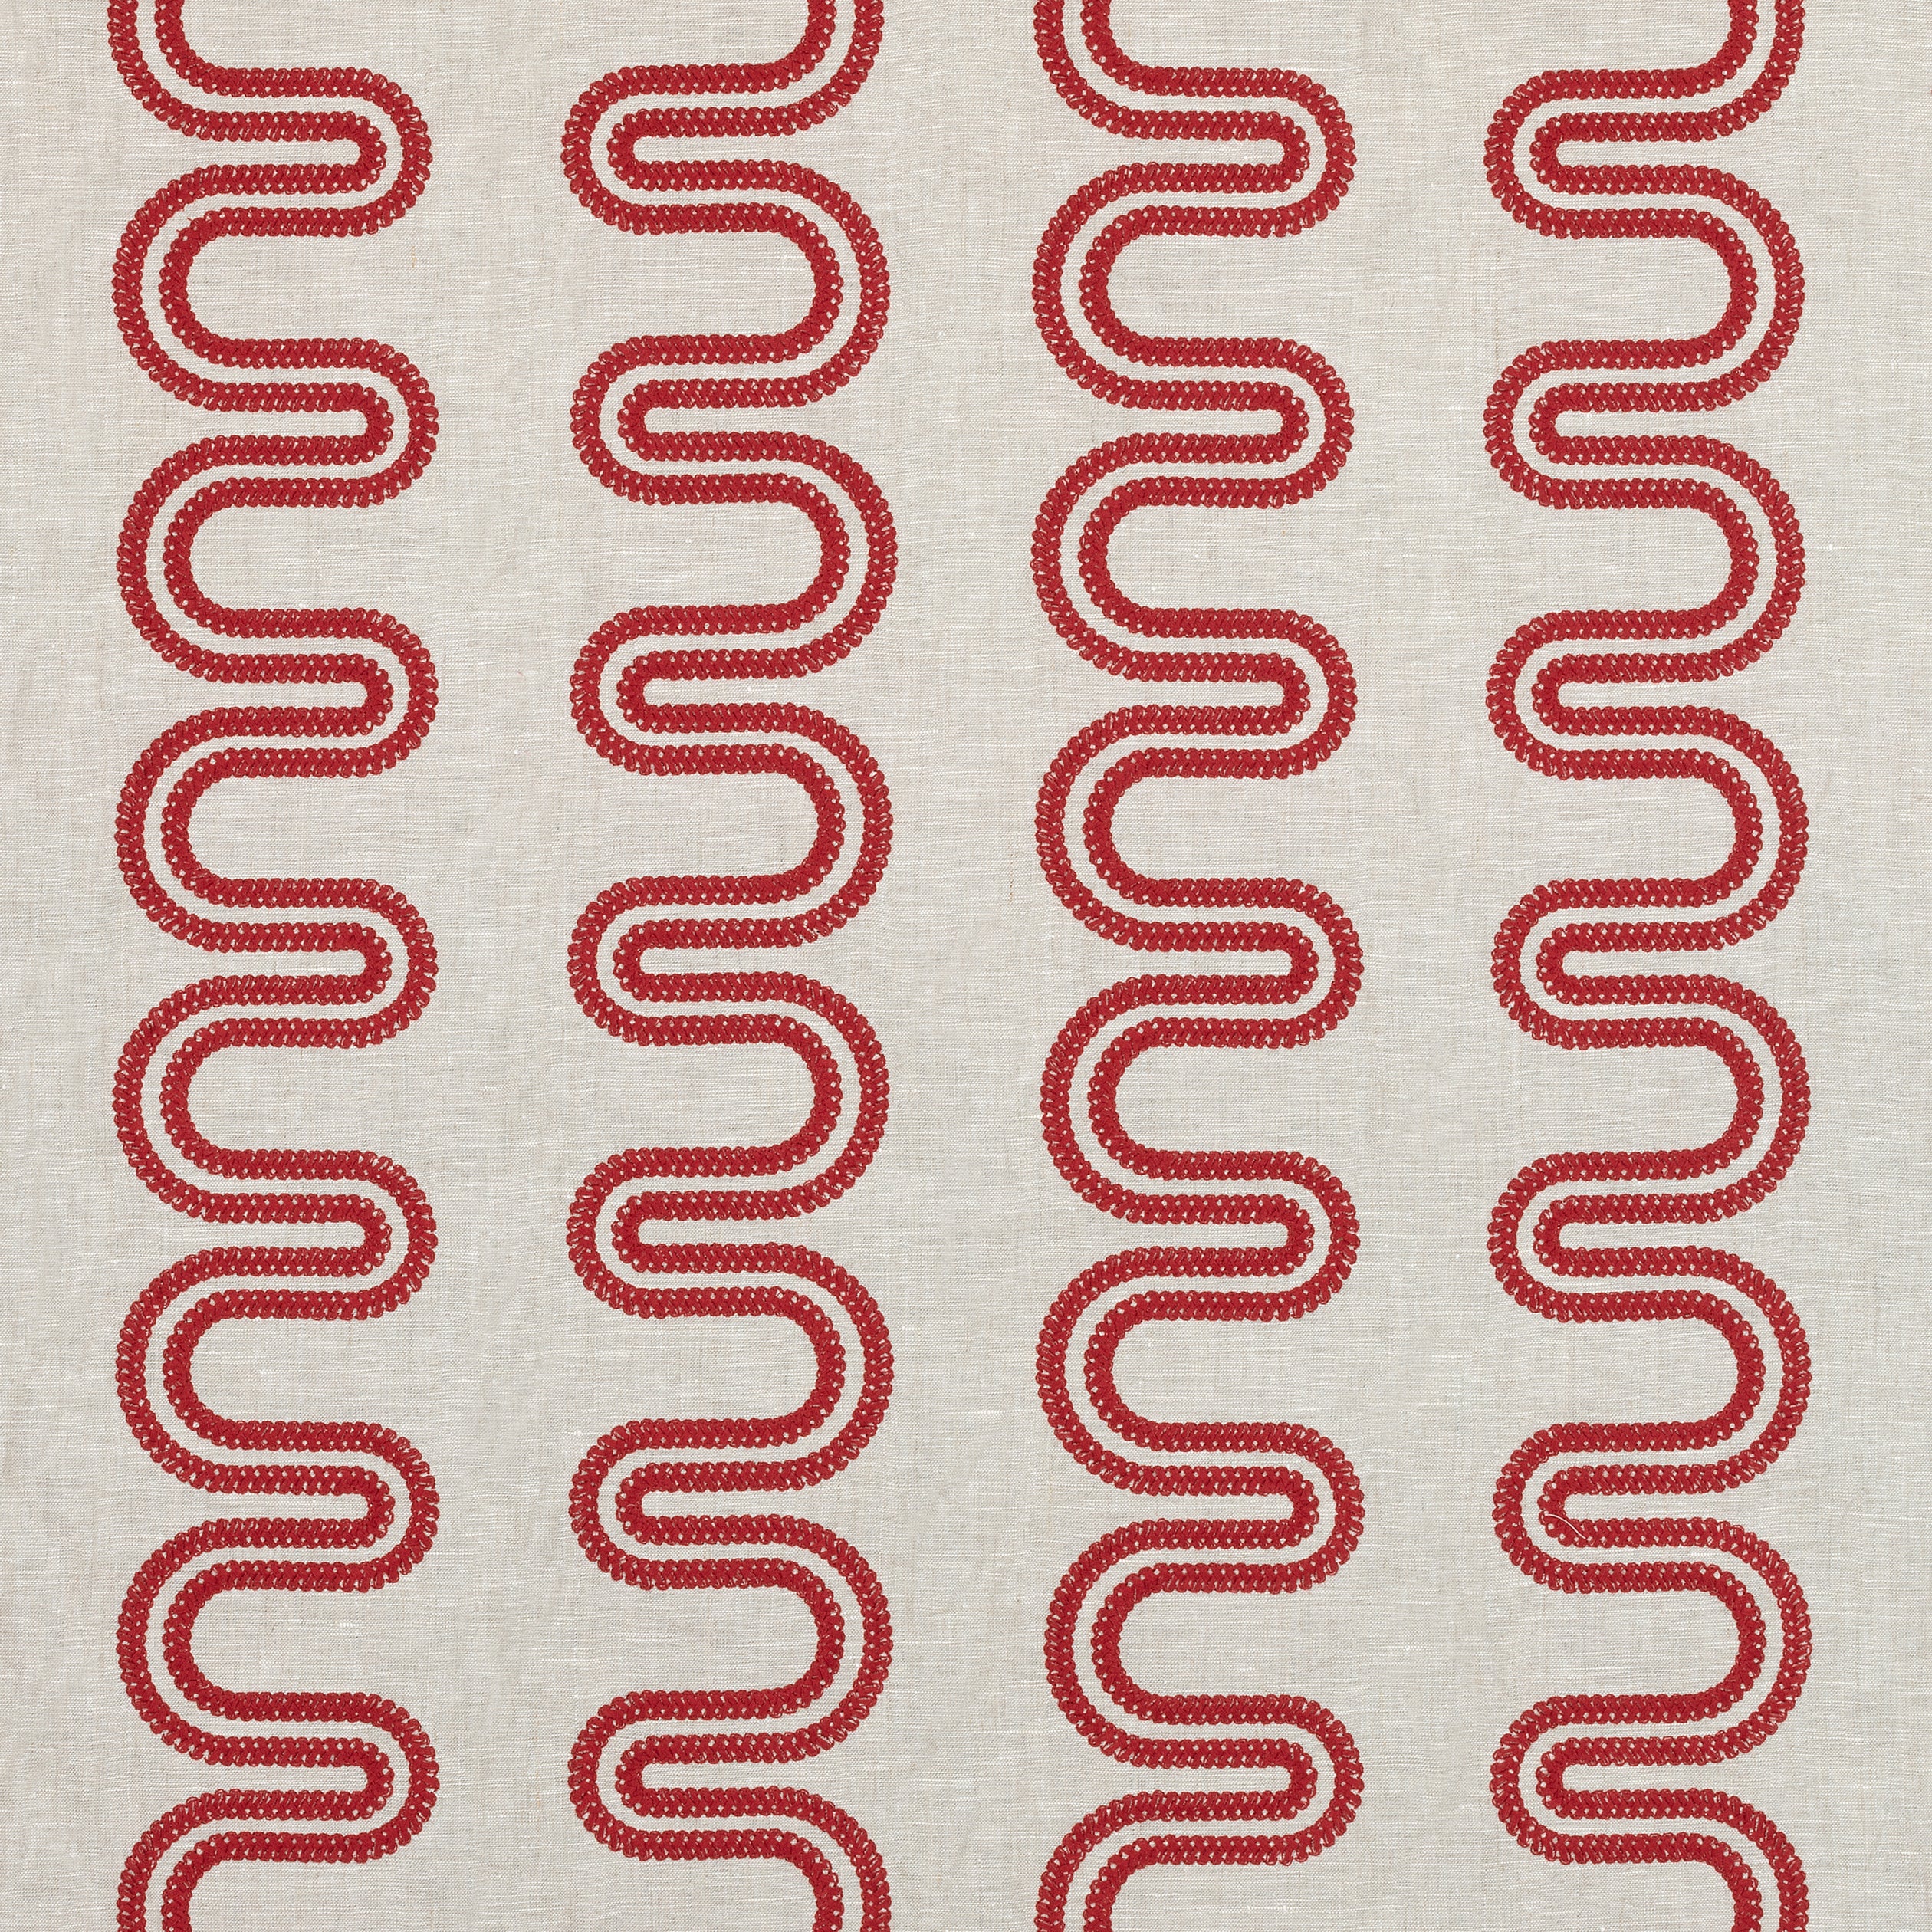 Herriot Way Embroidery fabric in raspberry on flax  color - pattern number AF9640 - by Anna French in the Savoy collection